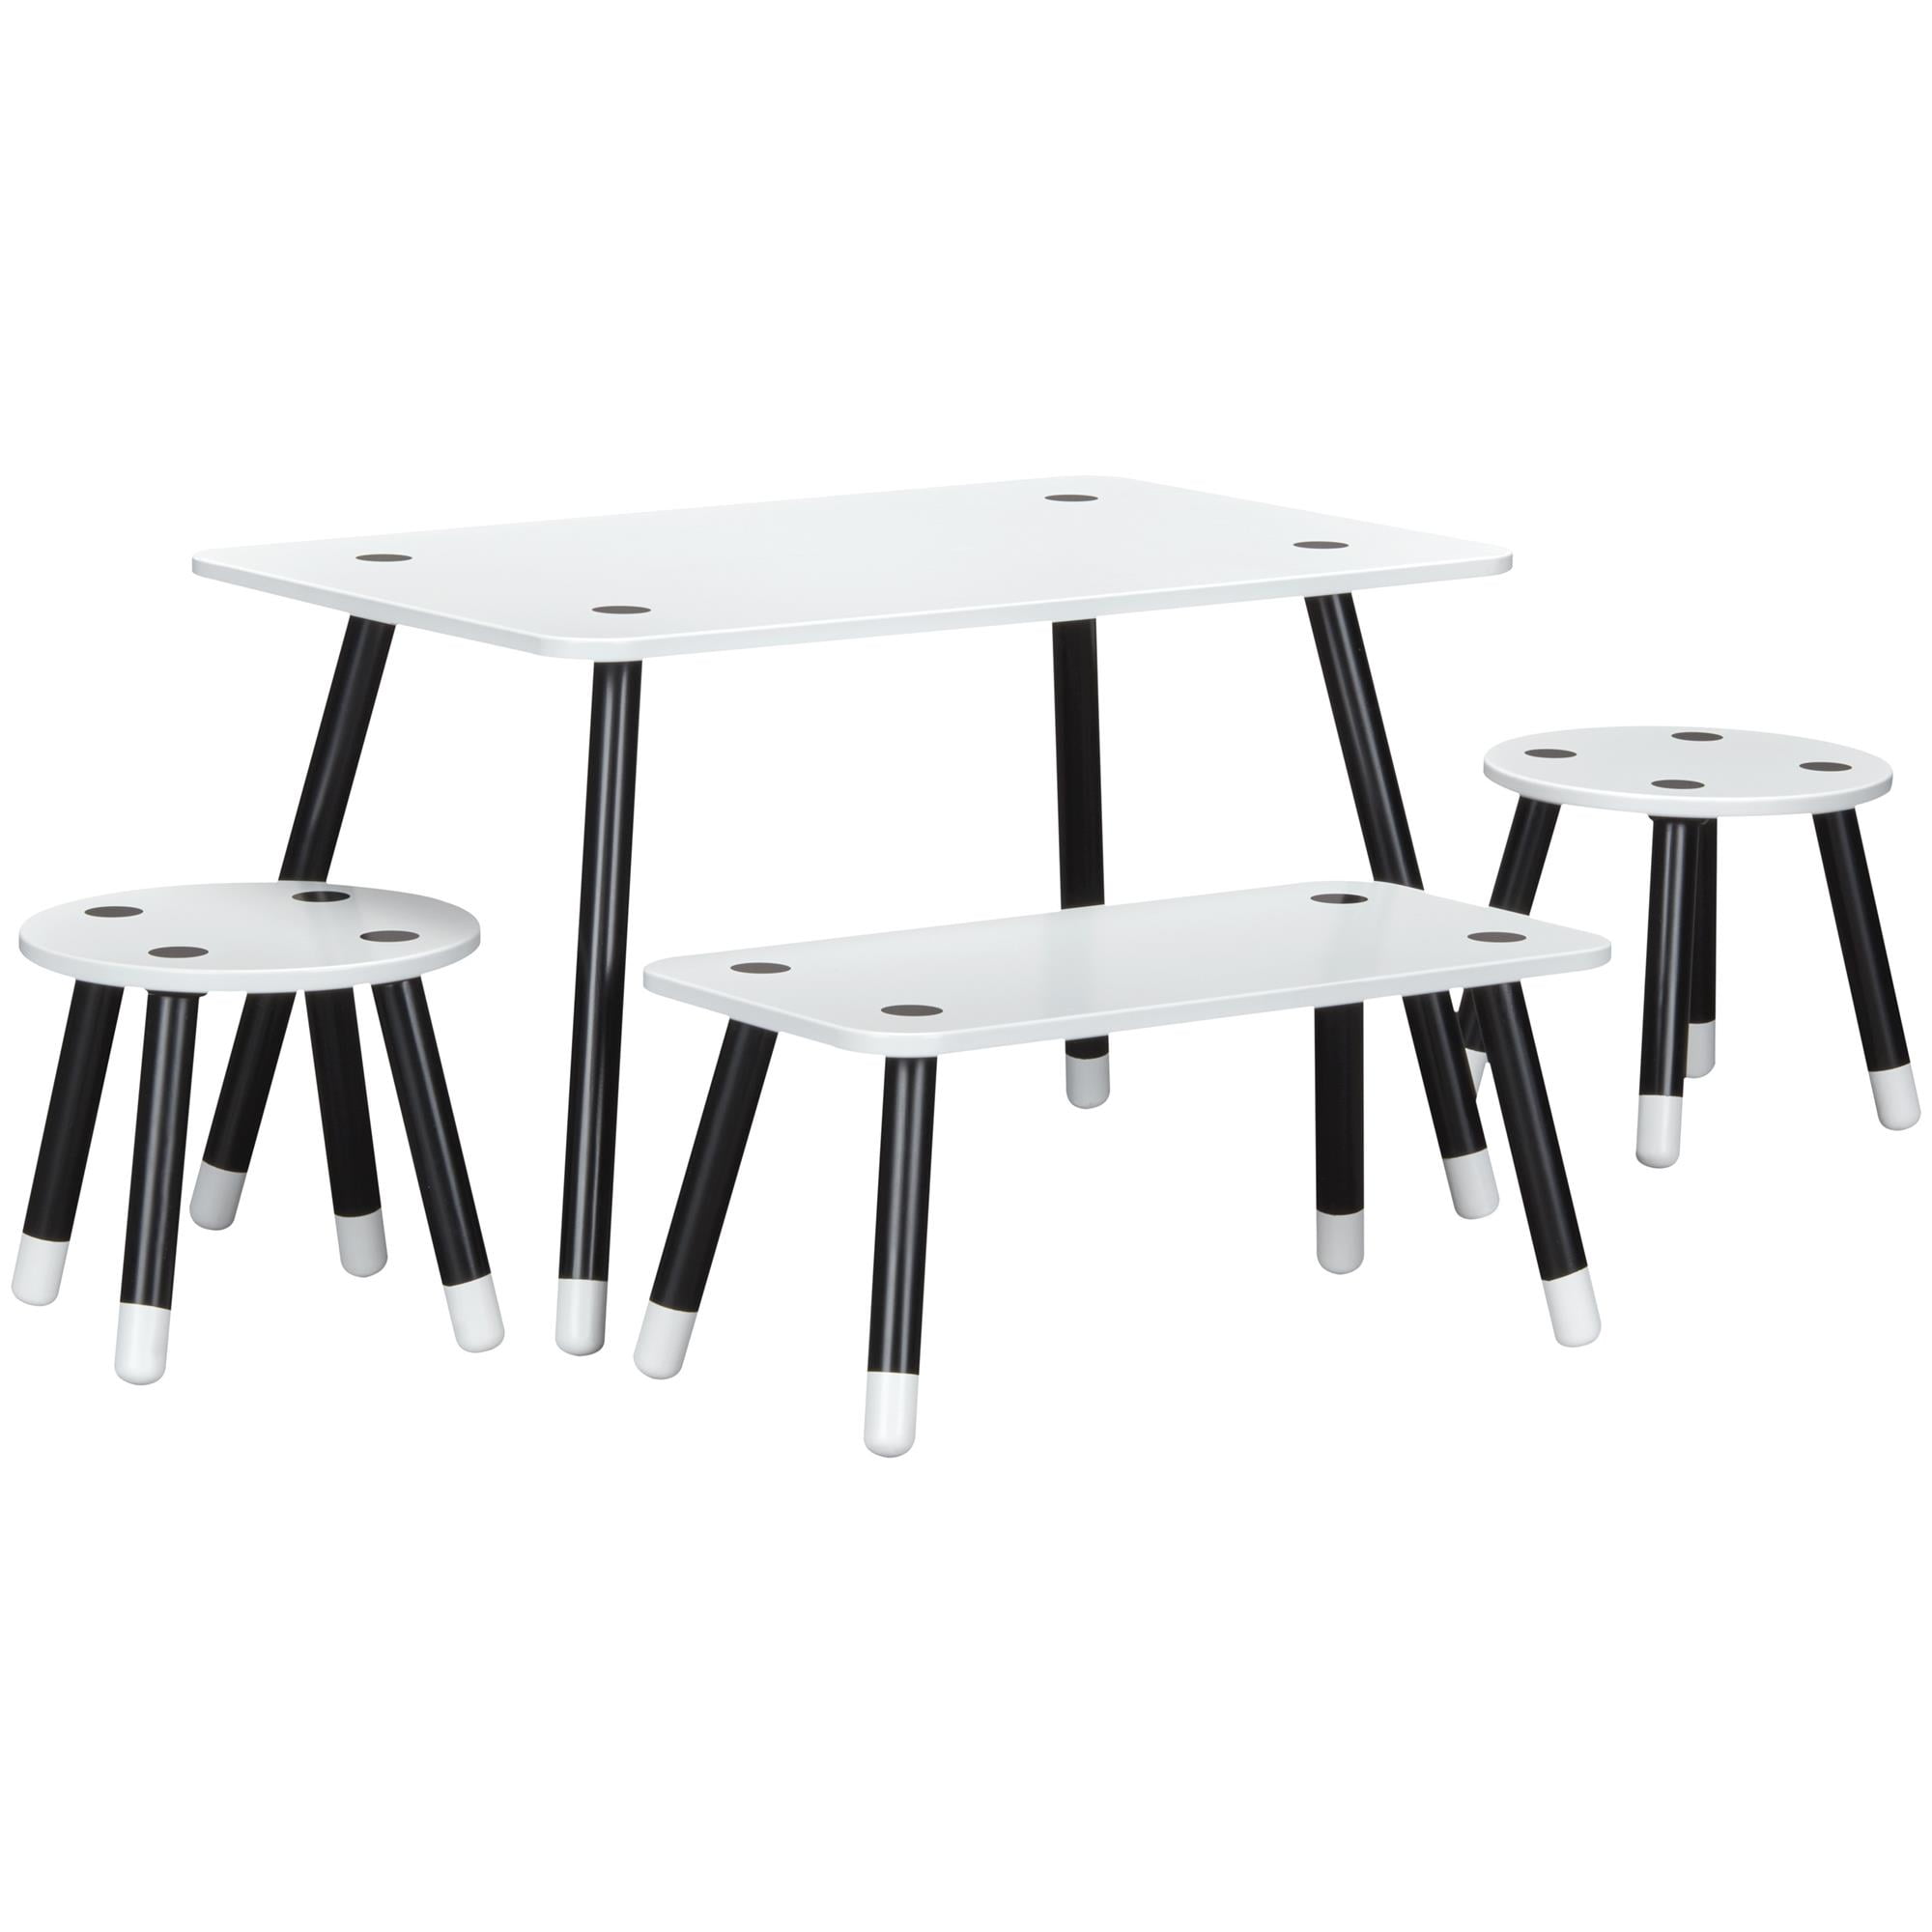 Clover Kids Play Table and Bench Set - White/Black - Little Seeds